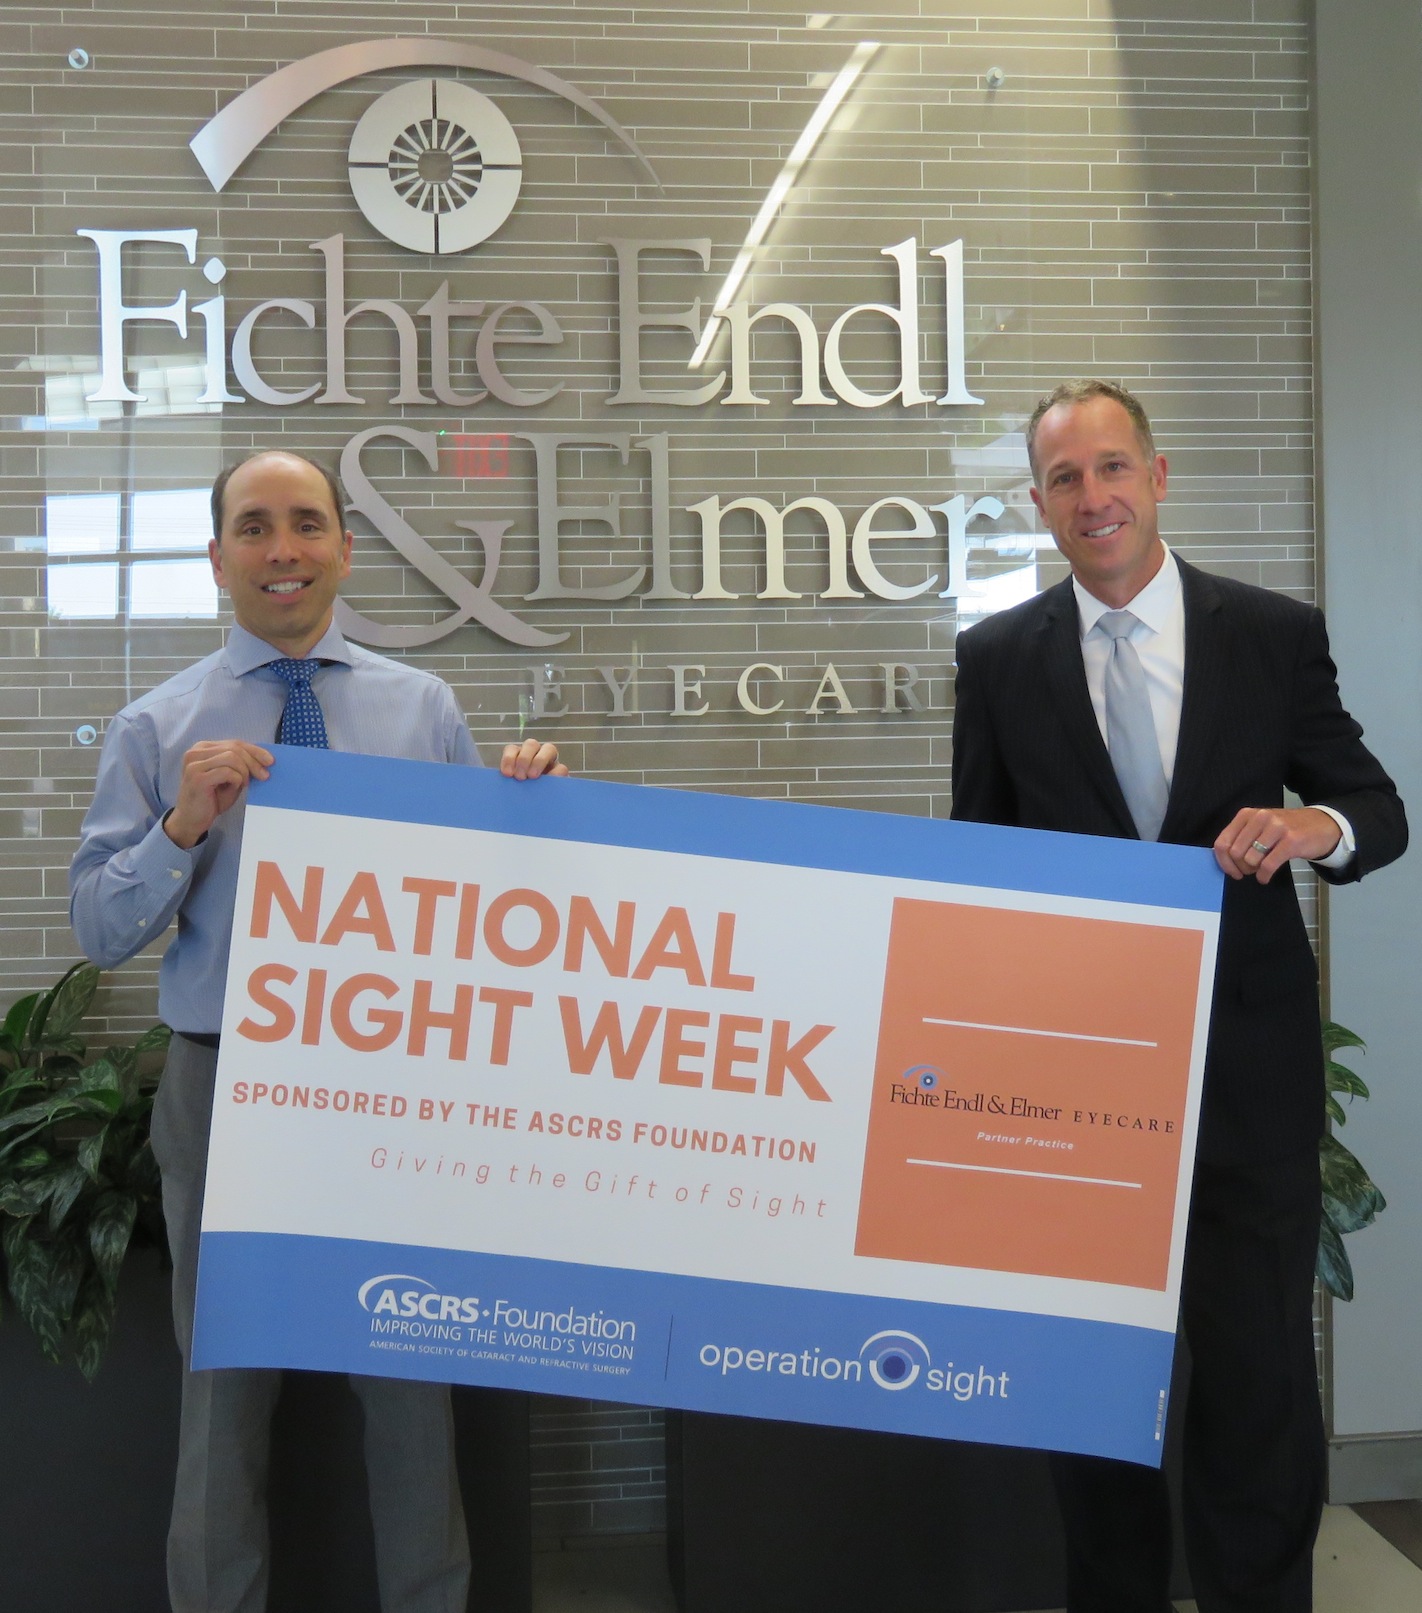 From left, Michael Endl M.D. and Thomas Elmer Jr. M.D. pose with the National Sight Week banner. (Photo by David Yarger)